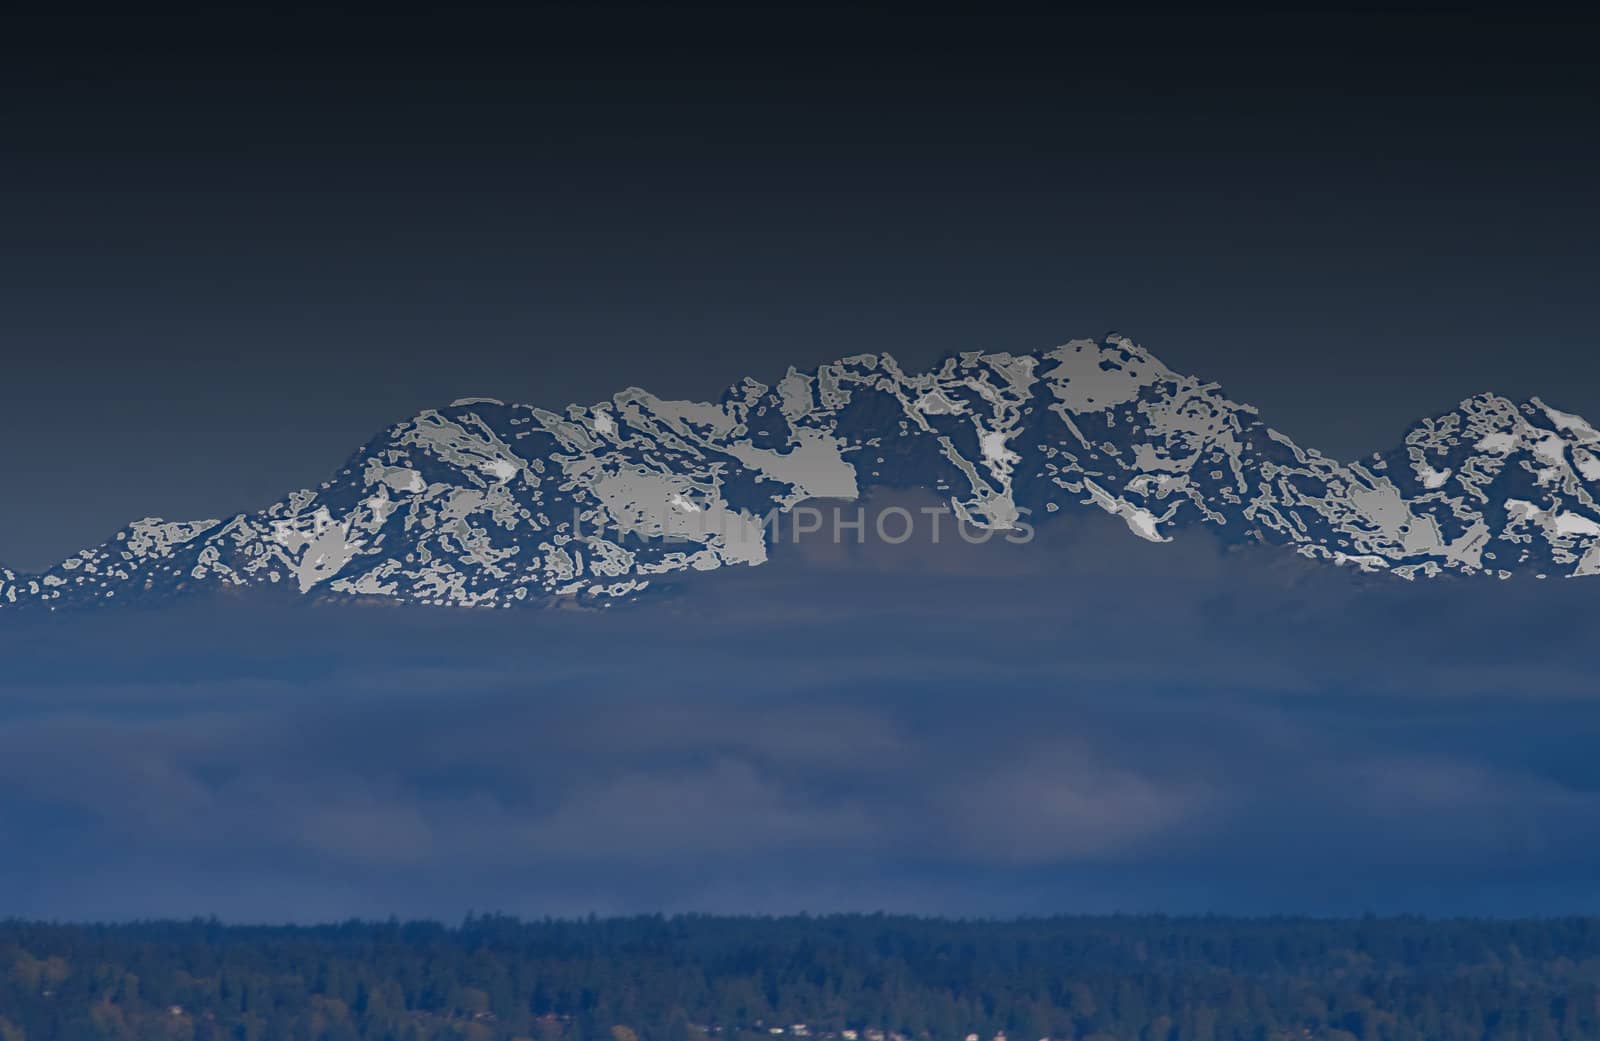 Olympic Mountains Picturesque v1 is an abstract conceptual representation of the sky above the western shores of Washington's Puget Sound. The clouds have createed an layer which makes the mountain peaks to have the appearance of floating above the forest and weather.
